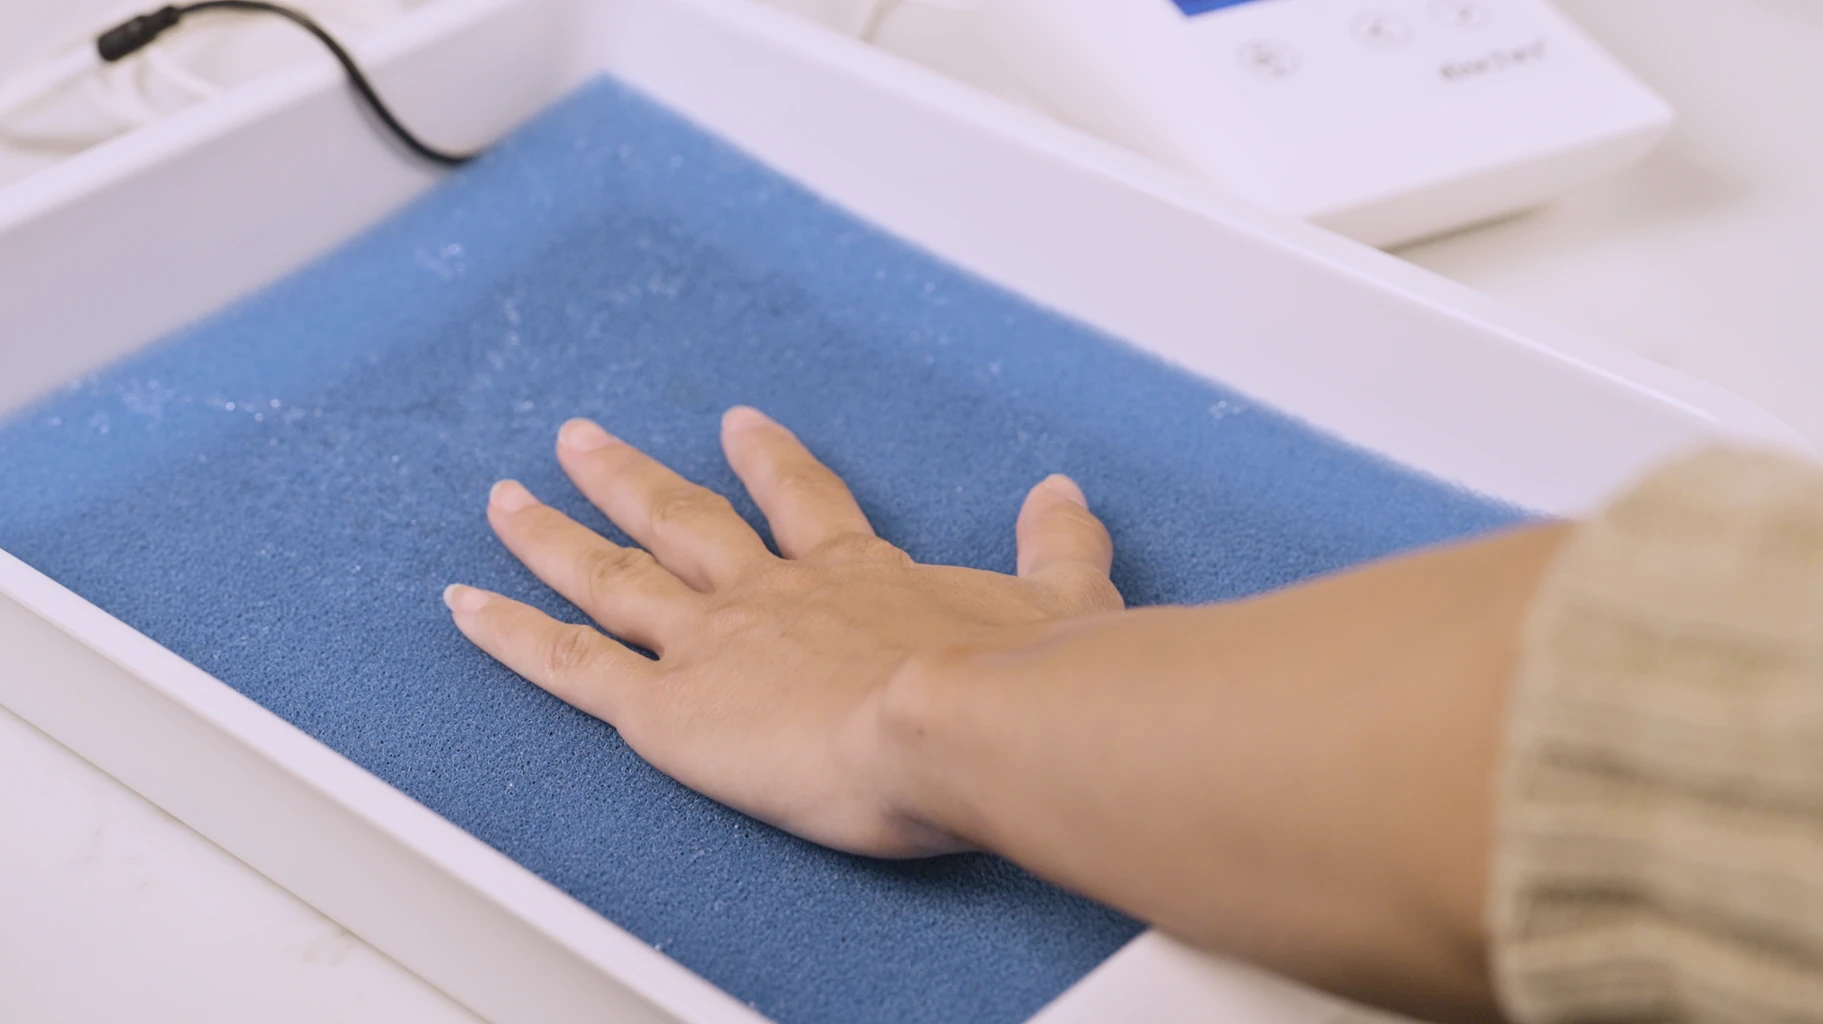 Image: An individual effectively managing palmar (hands) hyperhidrosis utilizes RA Fischer Co.'s original metal-free iontophoresis device, "The Fischer." Their hand is comfortably placed within one of the white water bath trays containing blue pH-balancing foam and equipped with silicone-graphite electrodes, demonstrating a comprehensive solution for treating their condition.